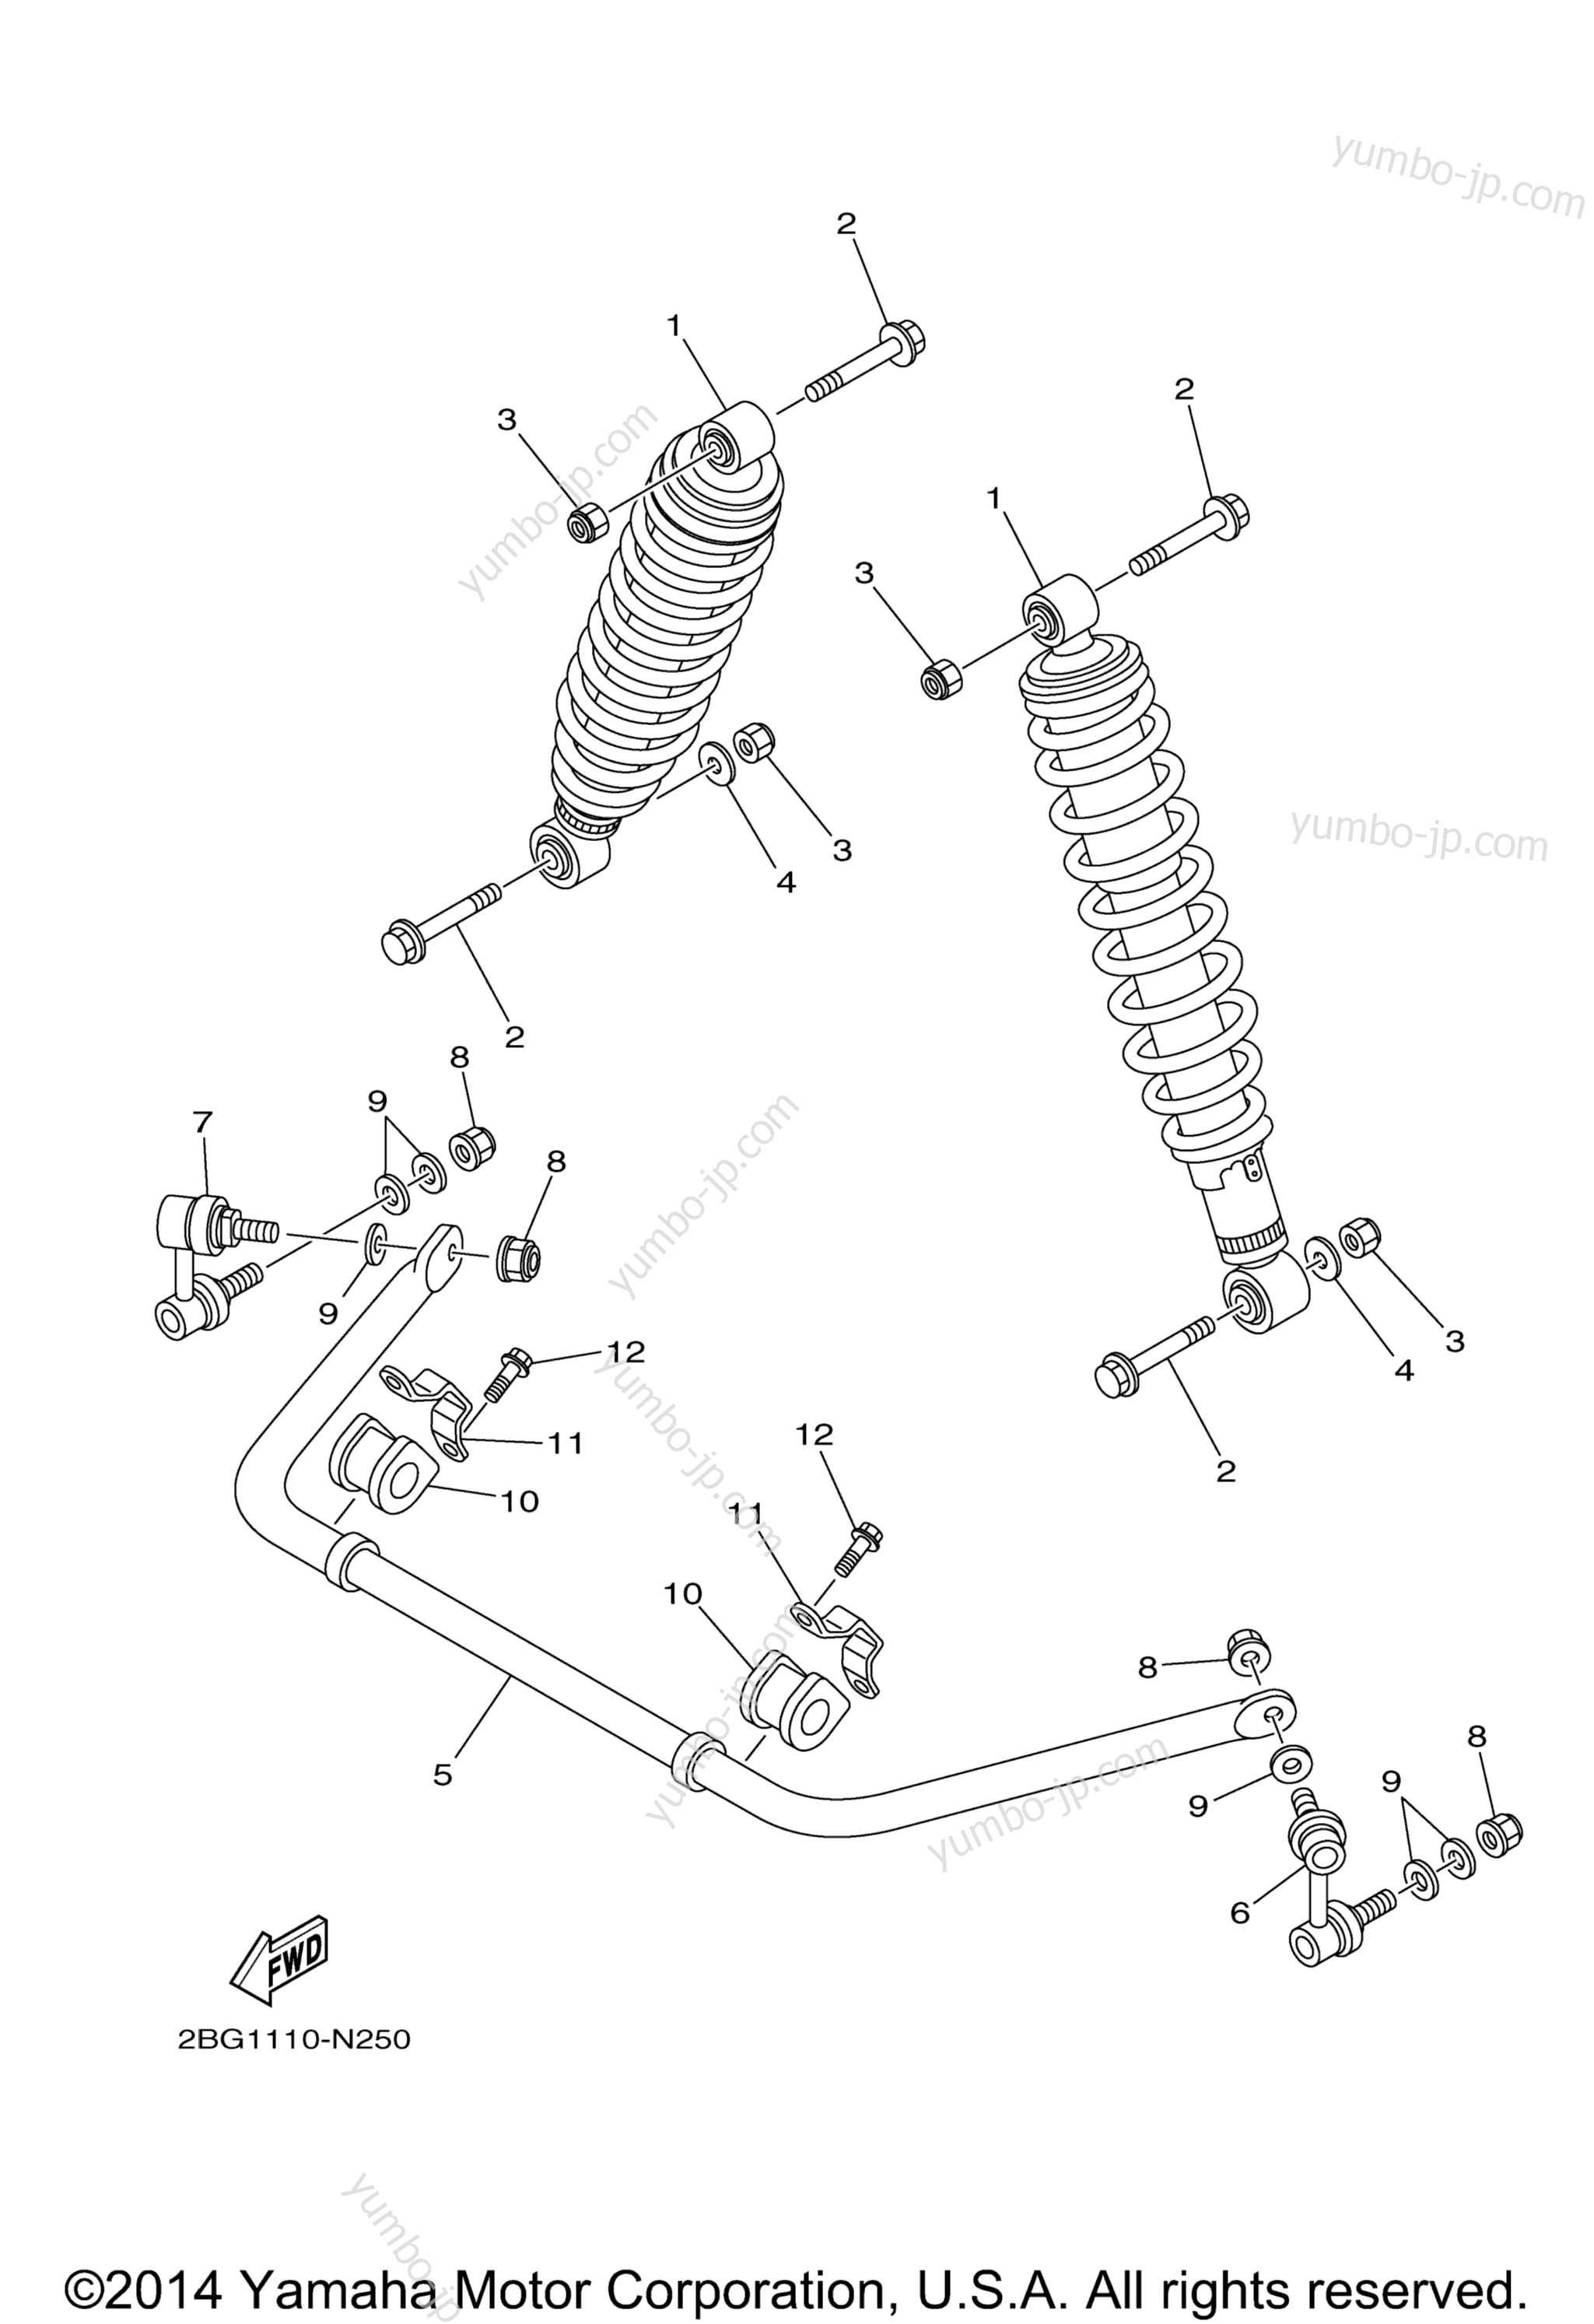 Rear Suspension for ATVs YAMAHA GRIZZLY 700 4WD (YFM700DFL) 2015 year